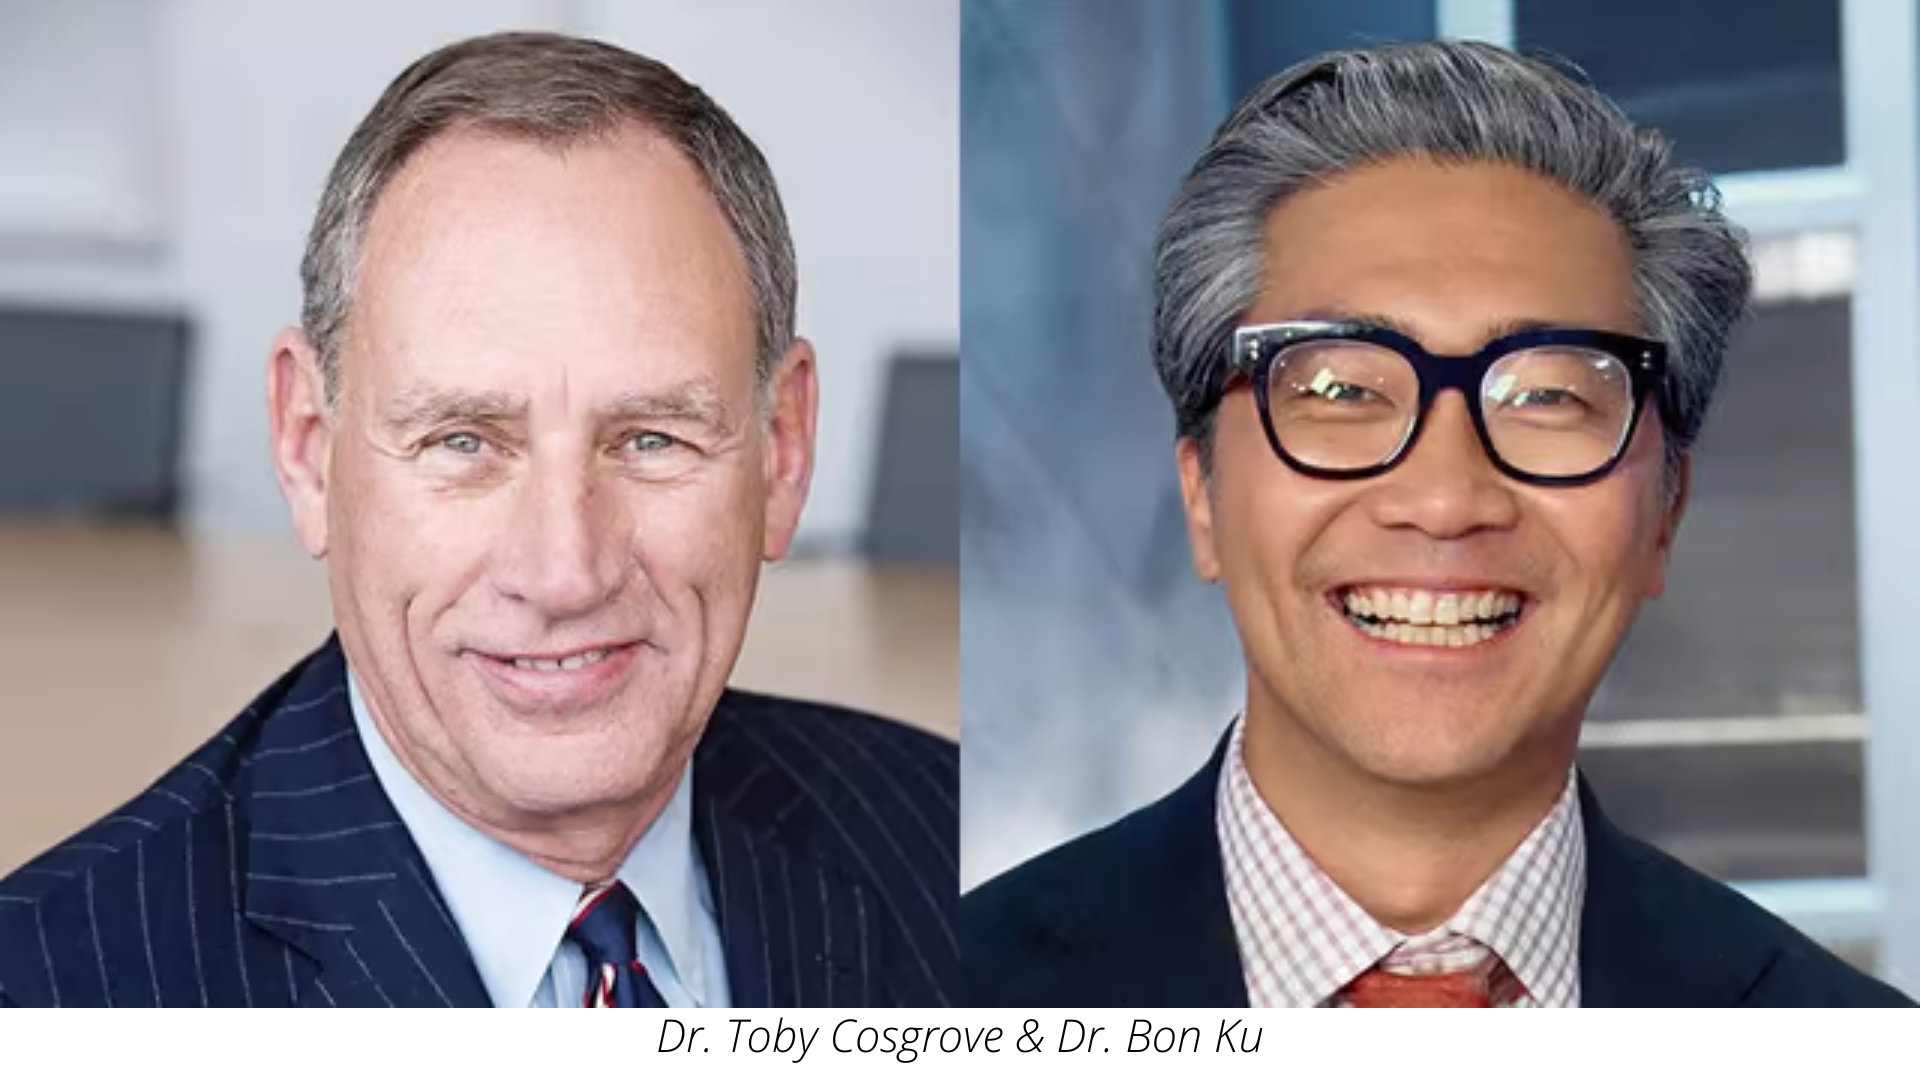 3D Systems announced the appointment of Dr. Toby Cosgrove and Dr. Bon Ku as members of the company’s recently established Medical Advisory Board (MAB).